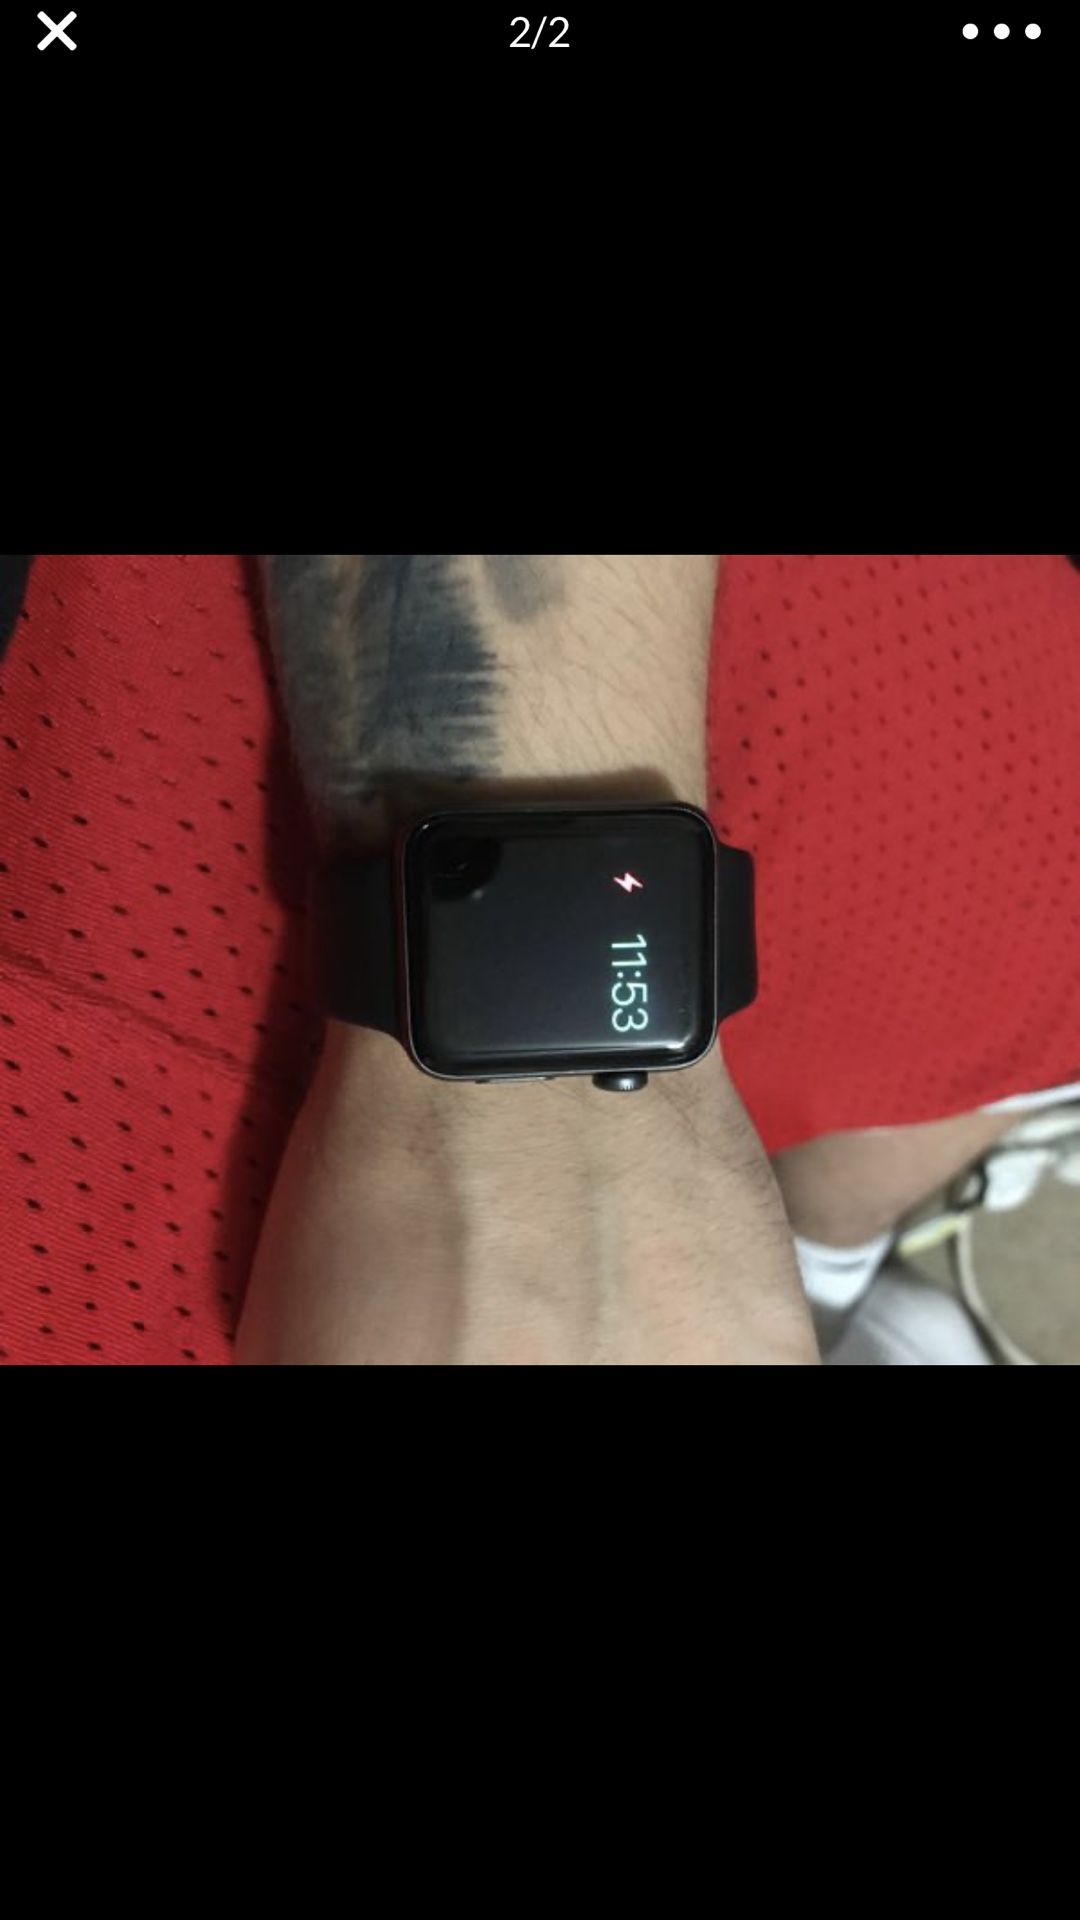 Apple Watch 42mm gps and cellular 3rd series